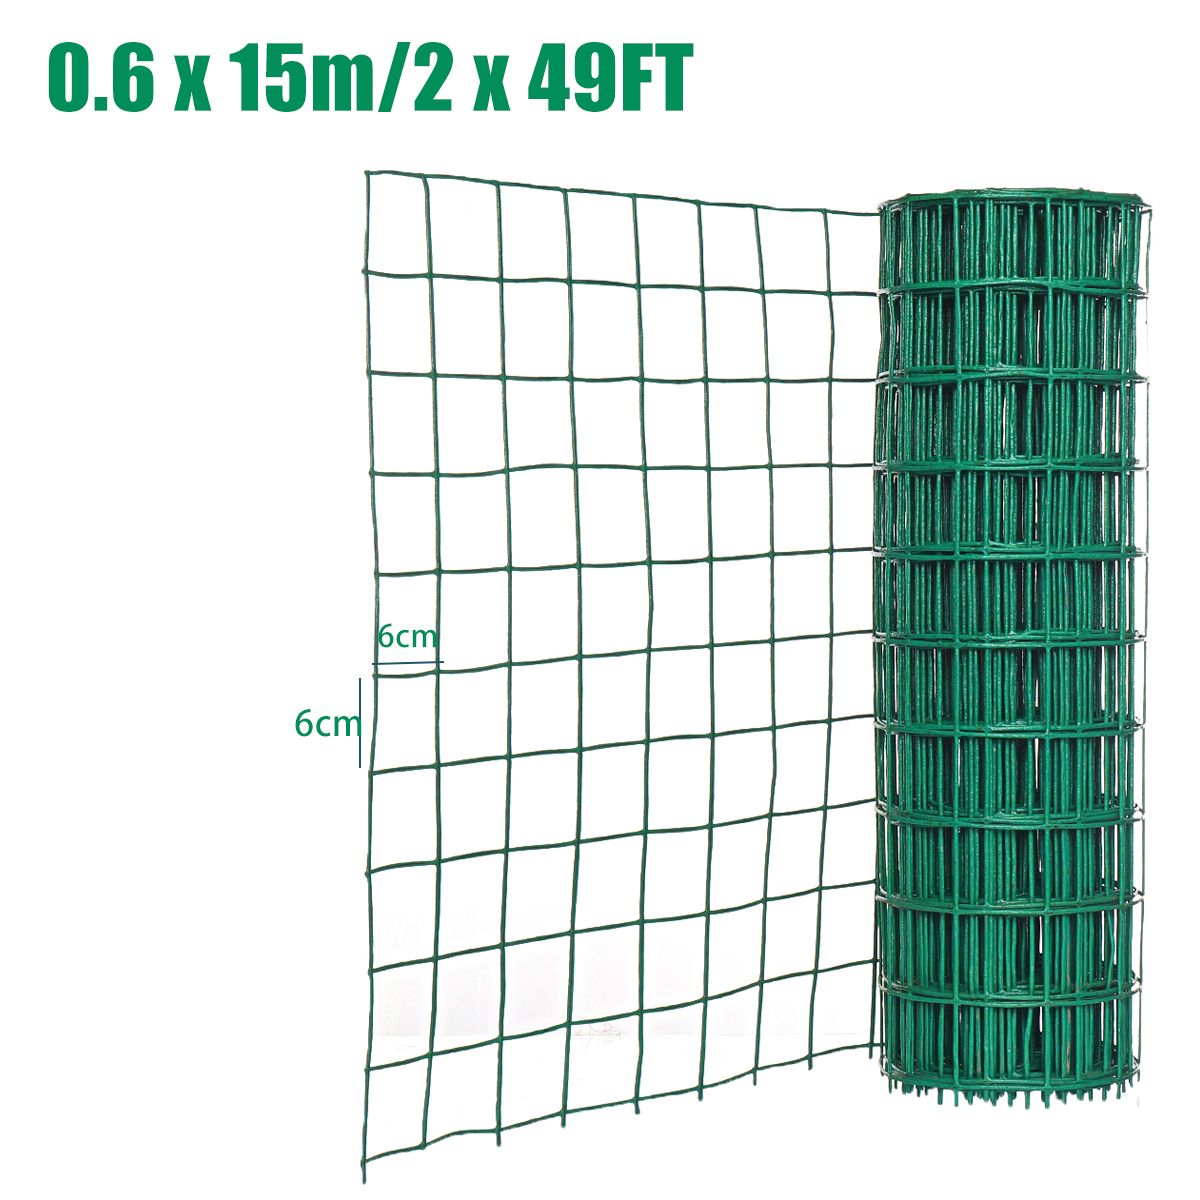 06x5m-Garden-Fence-Plant-Growth-Climbing-Frame-Fence-Lattice-Gardening-Net-Vegetable-Plant-Garden-To-1717552